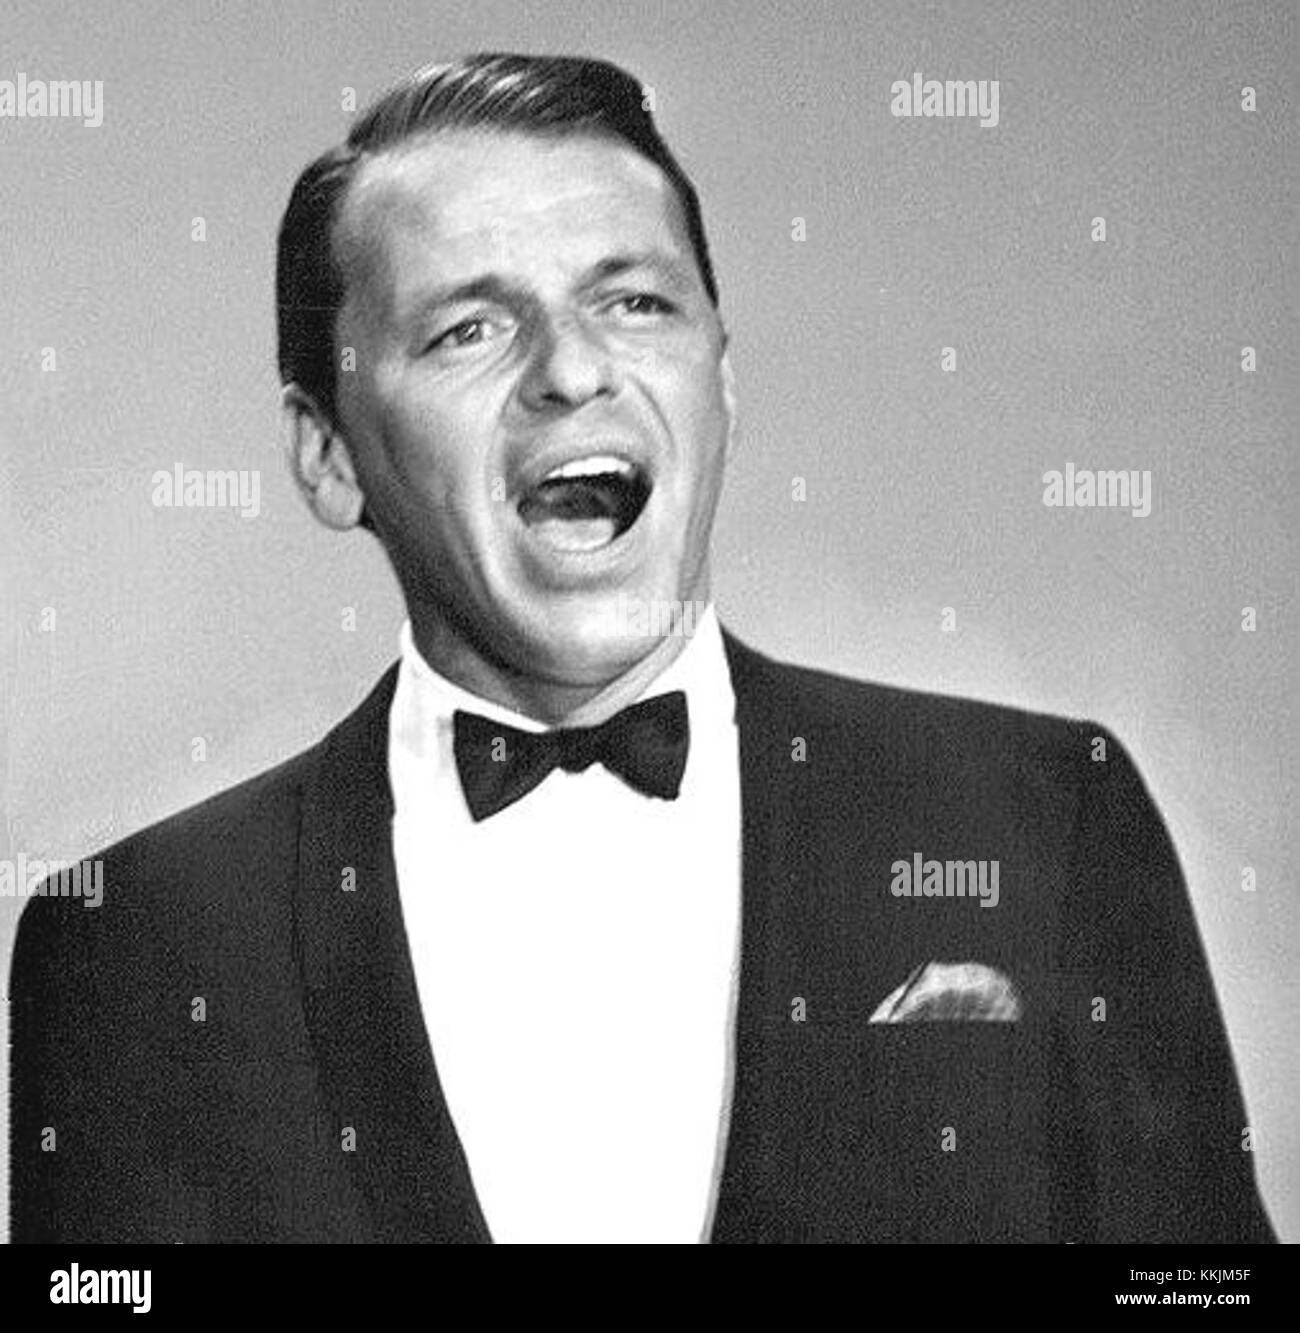 Frank sinatra Black and White Stock Photos & Images - Alamy